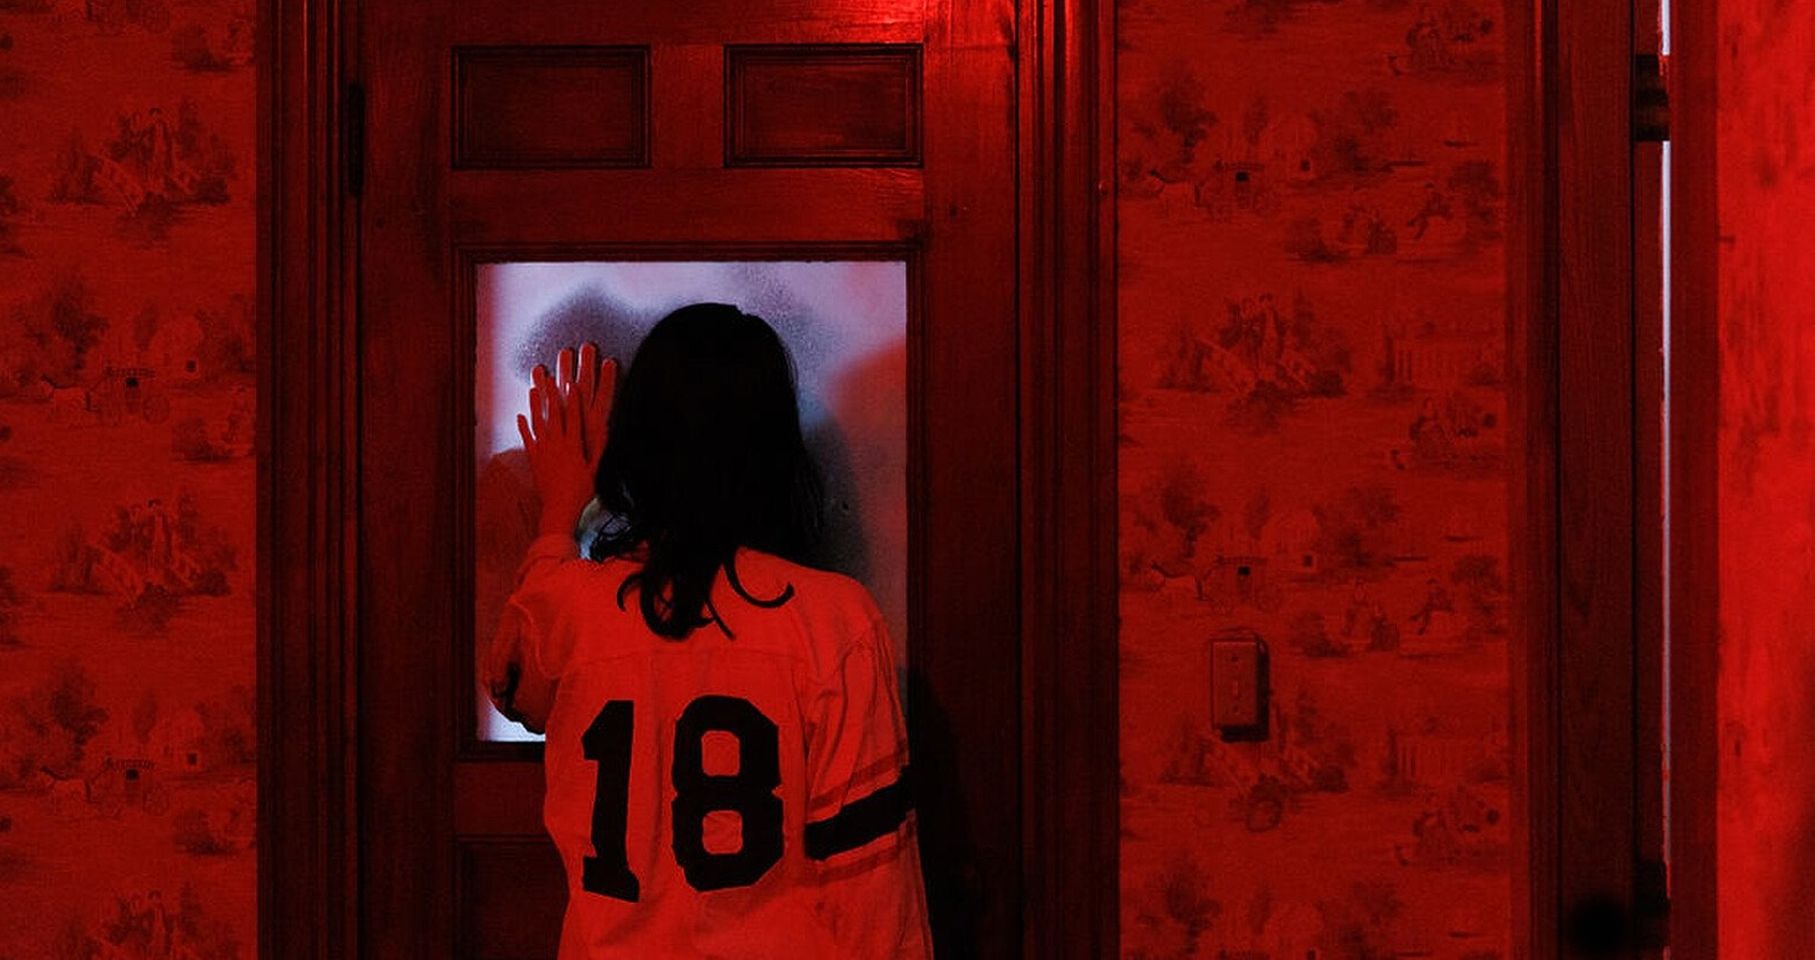 A person in a room bathed in red light is spotted wearing a jersey number 18. They are seen curiously looking through a frosted glass door.